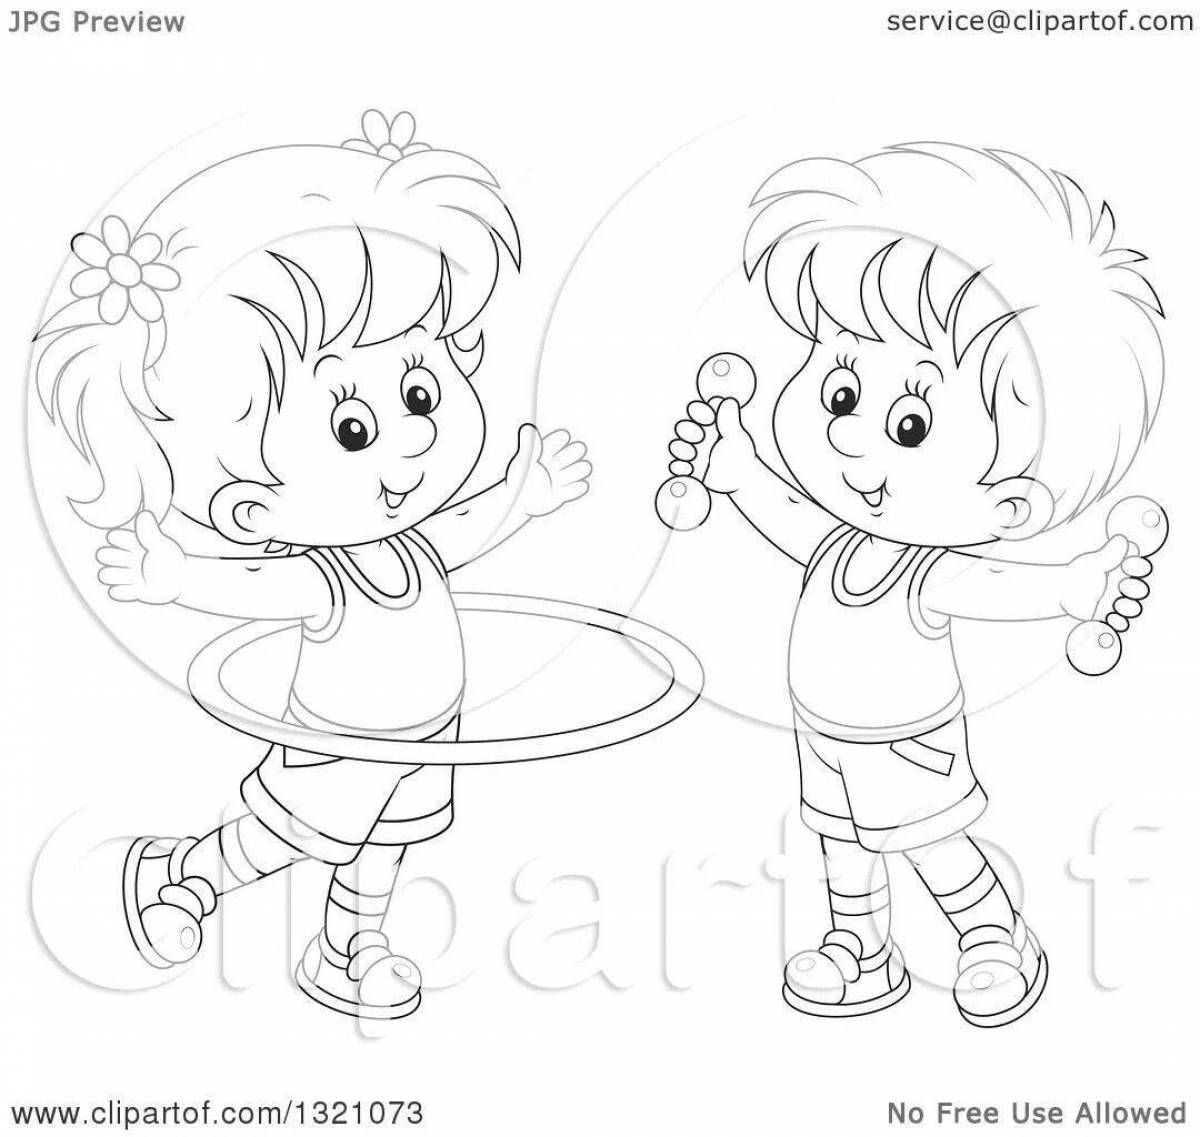 Joyful healthy lifestyle coloring page for kids